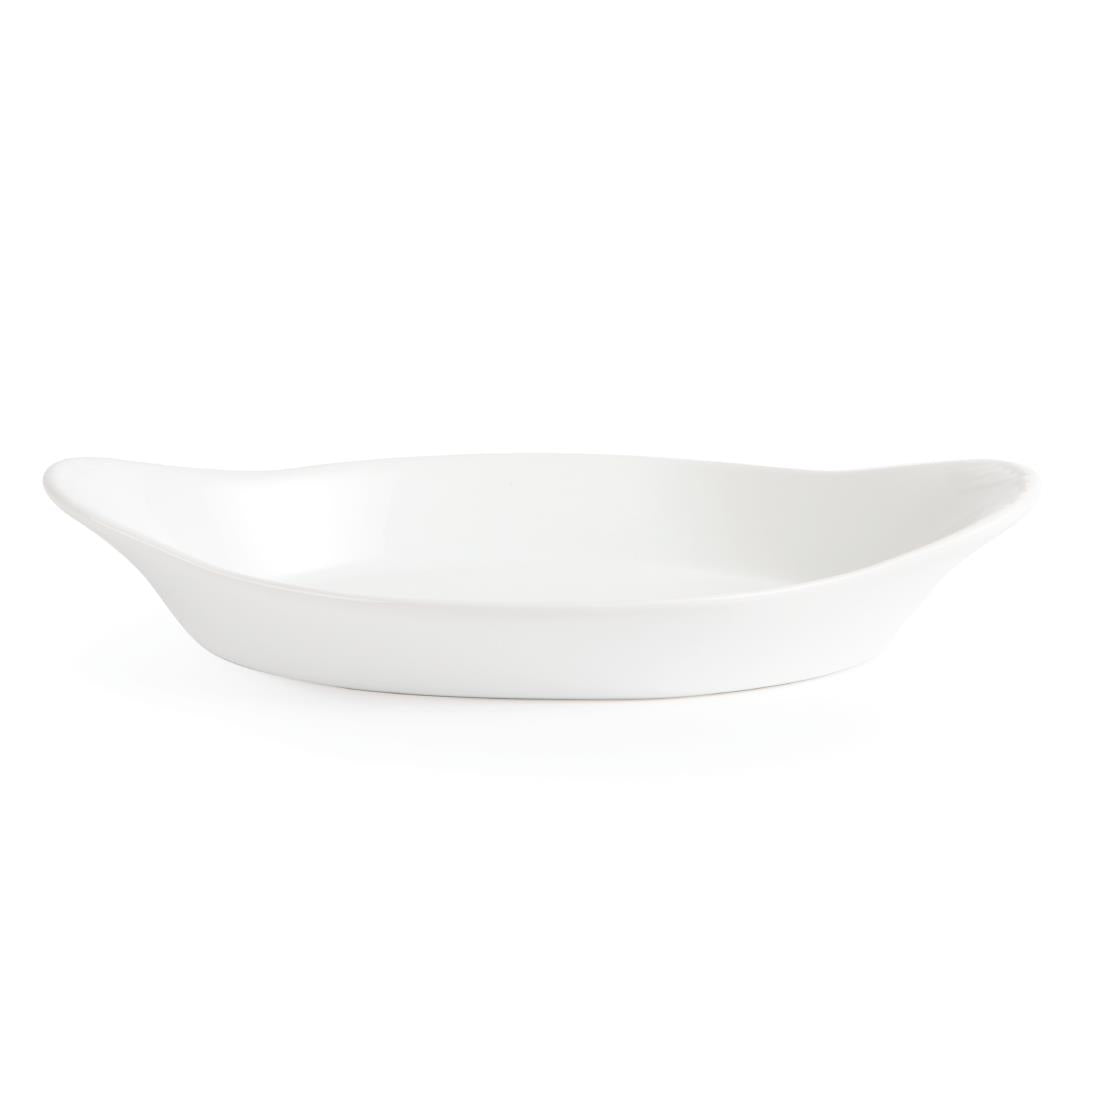 W427 Olympia Whiteware Oval Eared Dishes 229x 127mm (Pack of 6)